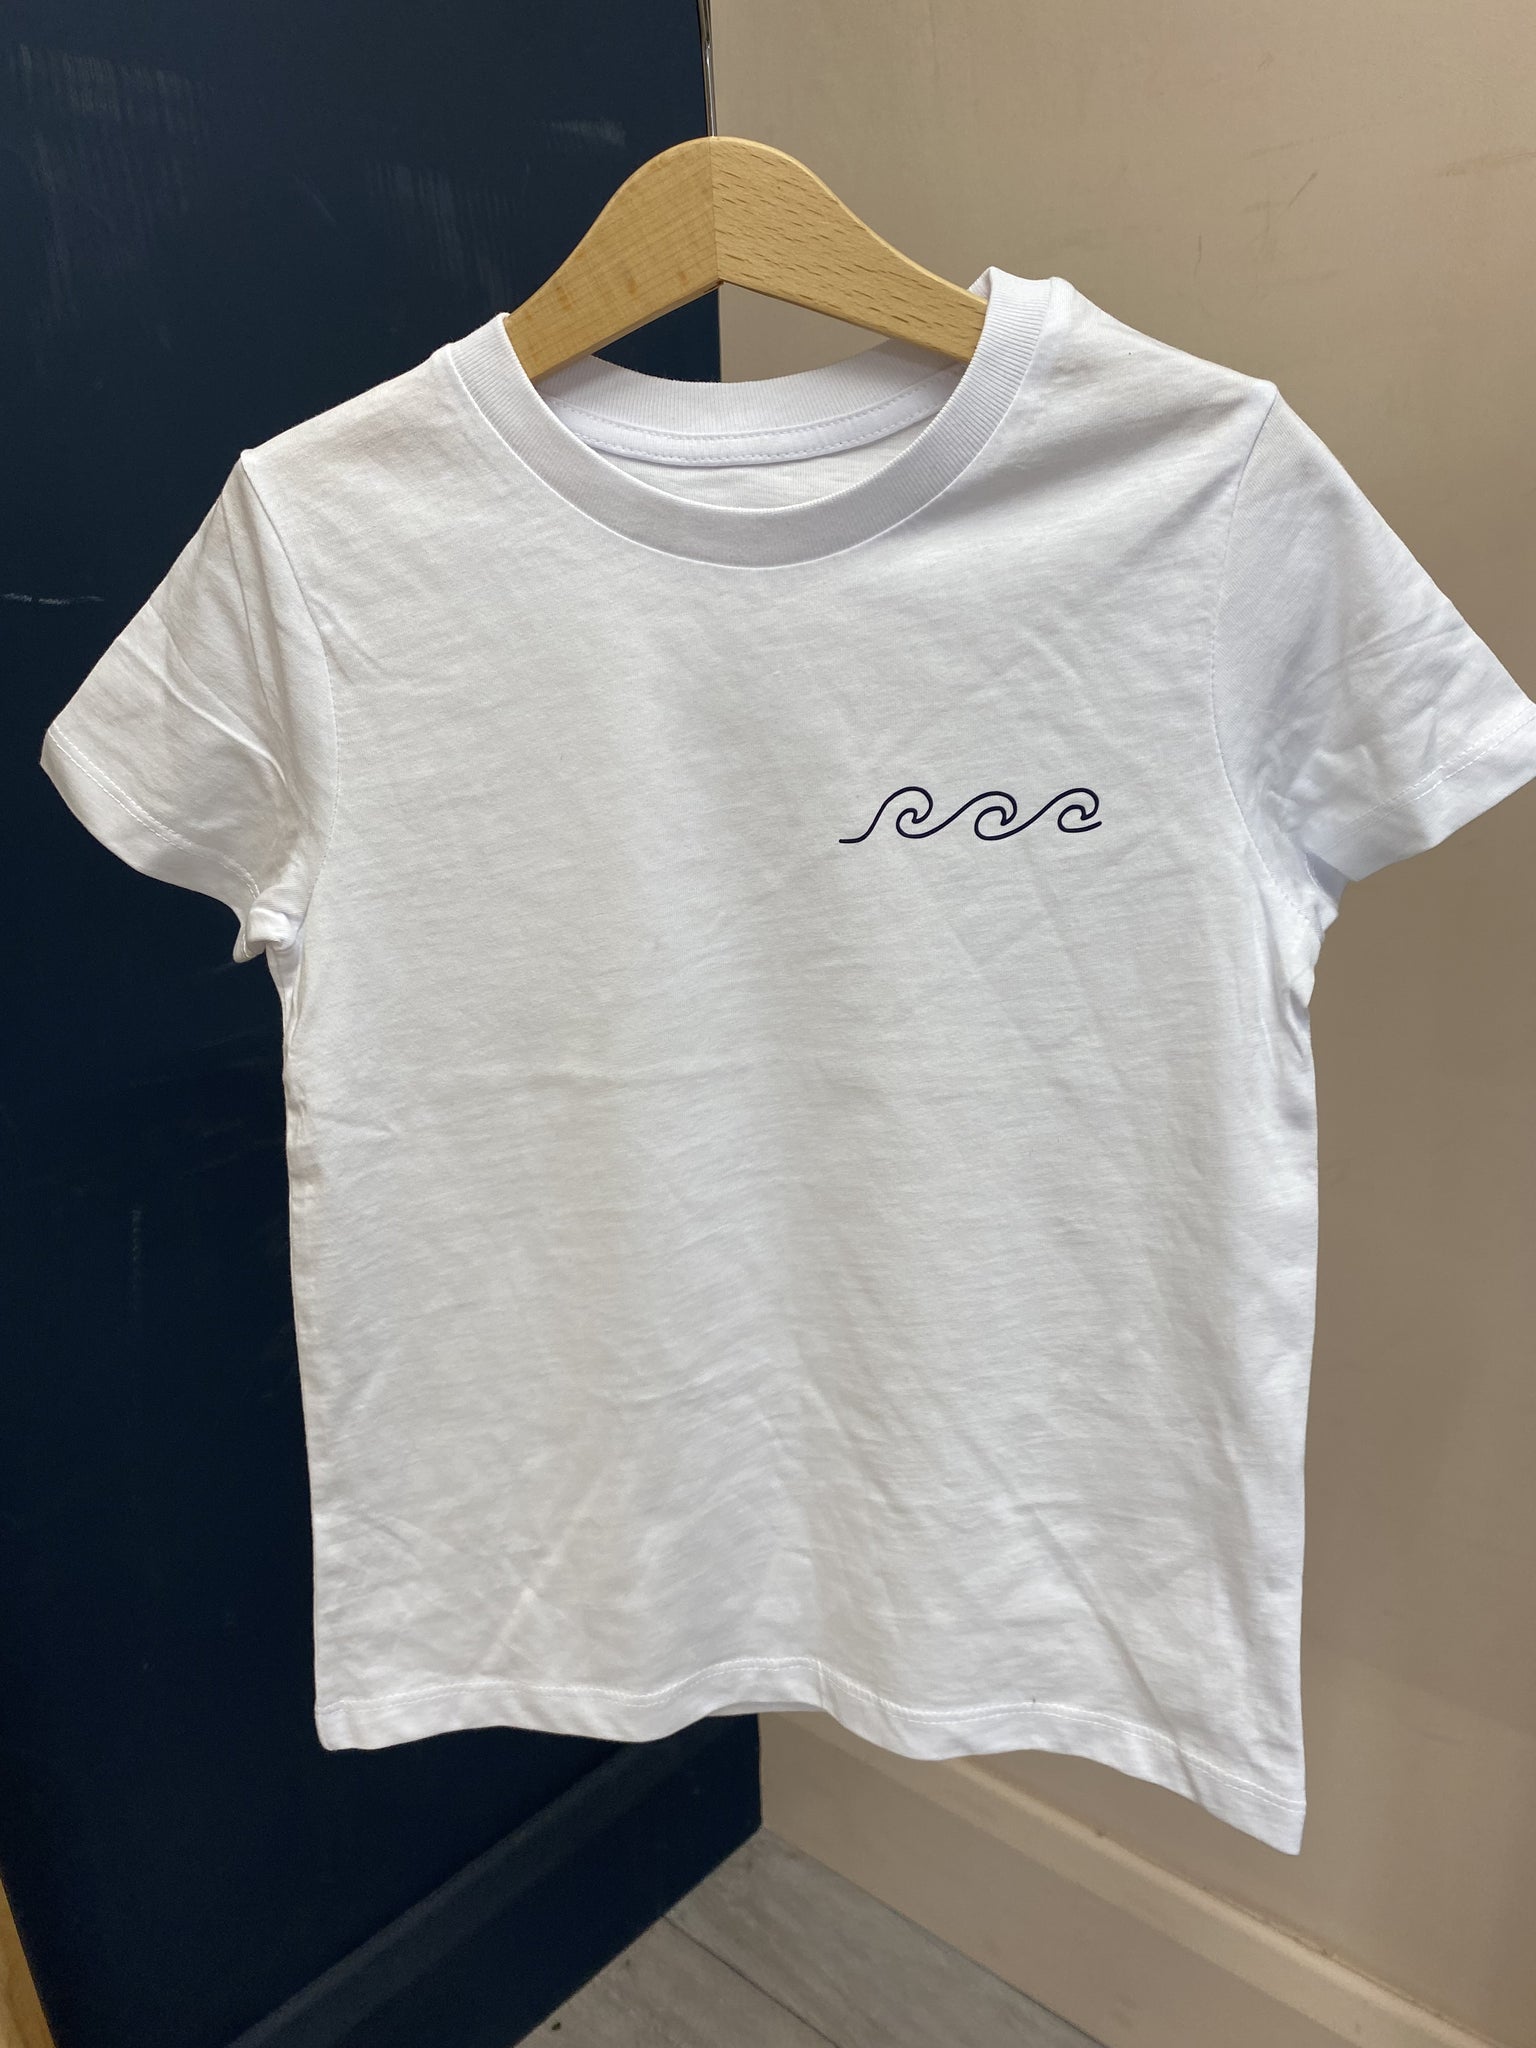 SAMPLE SALE Kids waves motif, white t-shirt with navy vinyl, age 5-6